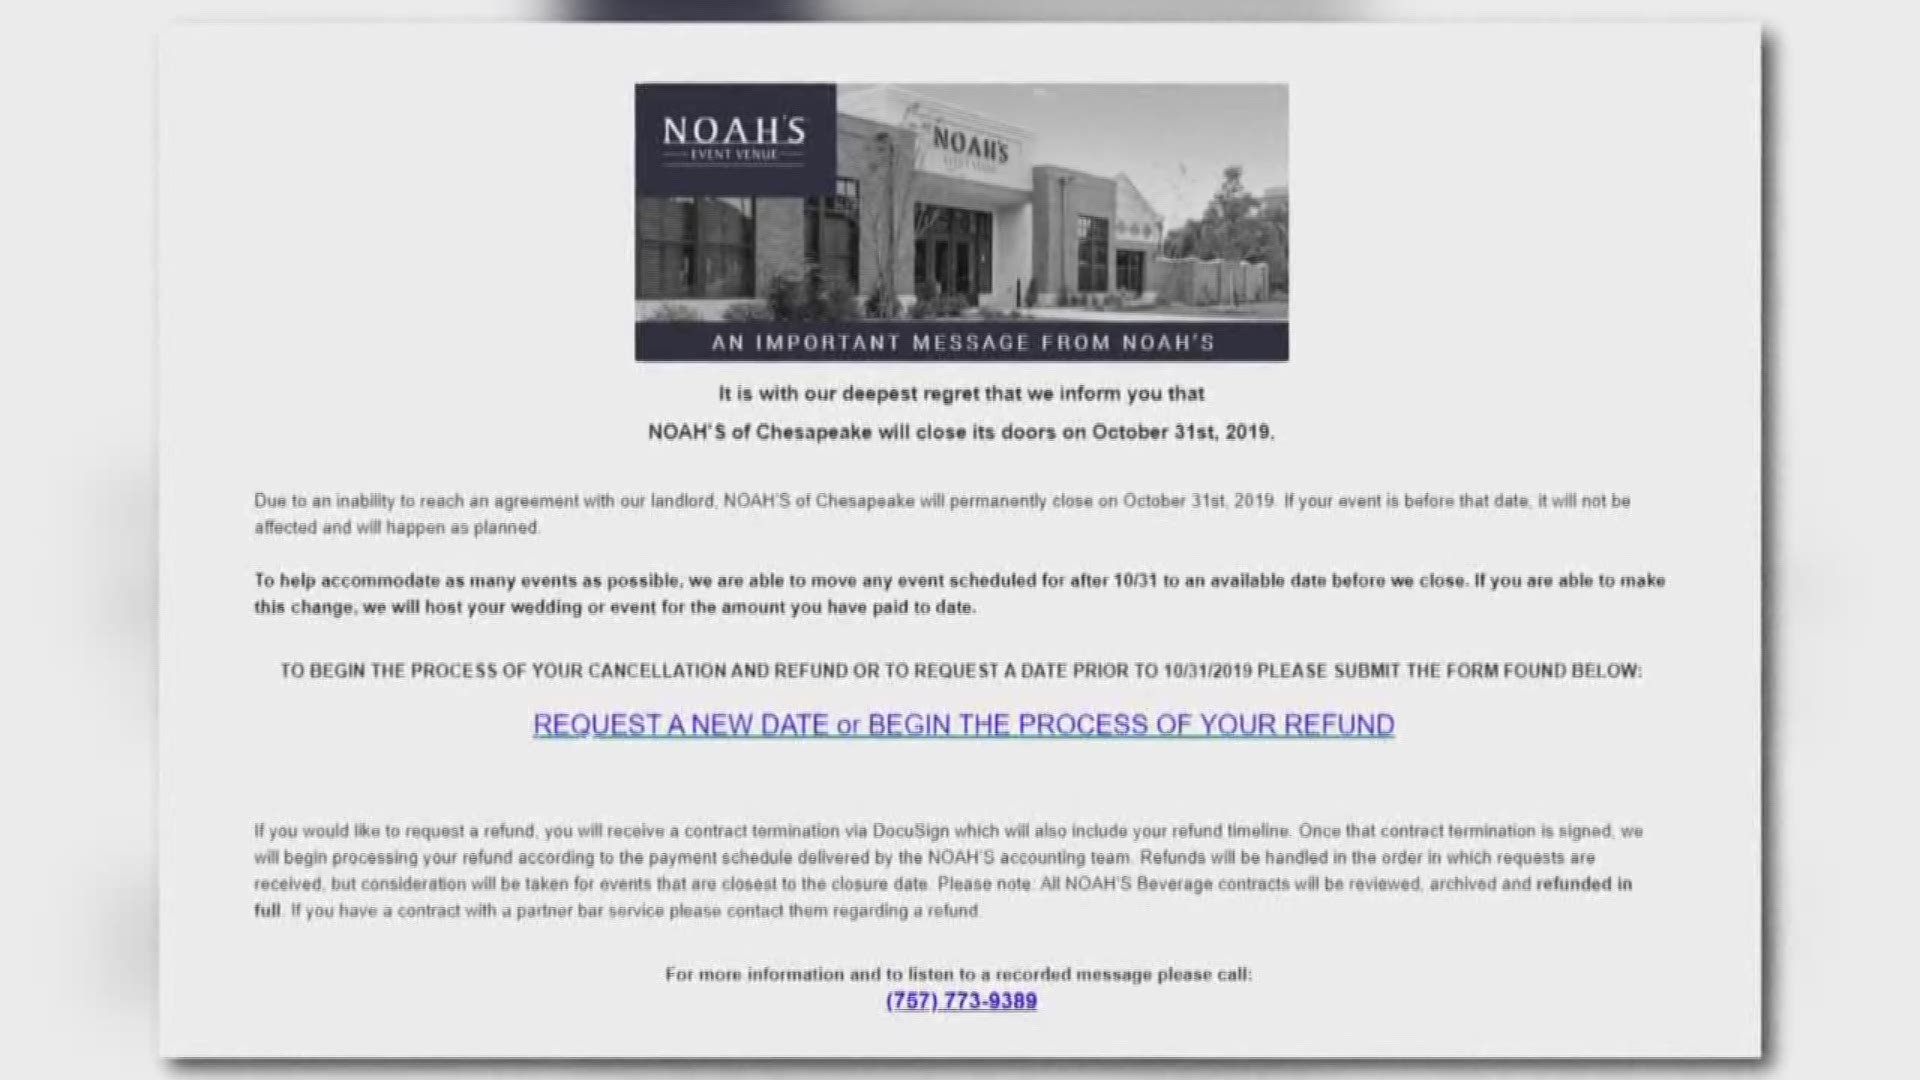 Noah's Event Venue in Chesapeake filed for bankruptcy. Anyone with an event scheduled for after October won't be able to host it at the venue leaving many local brides scrambling for a new spot for their weddings.